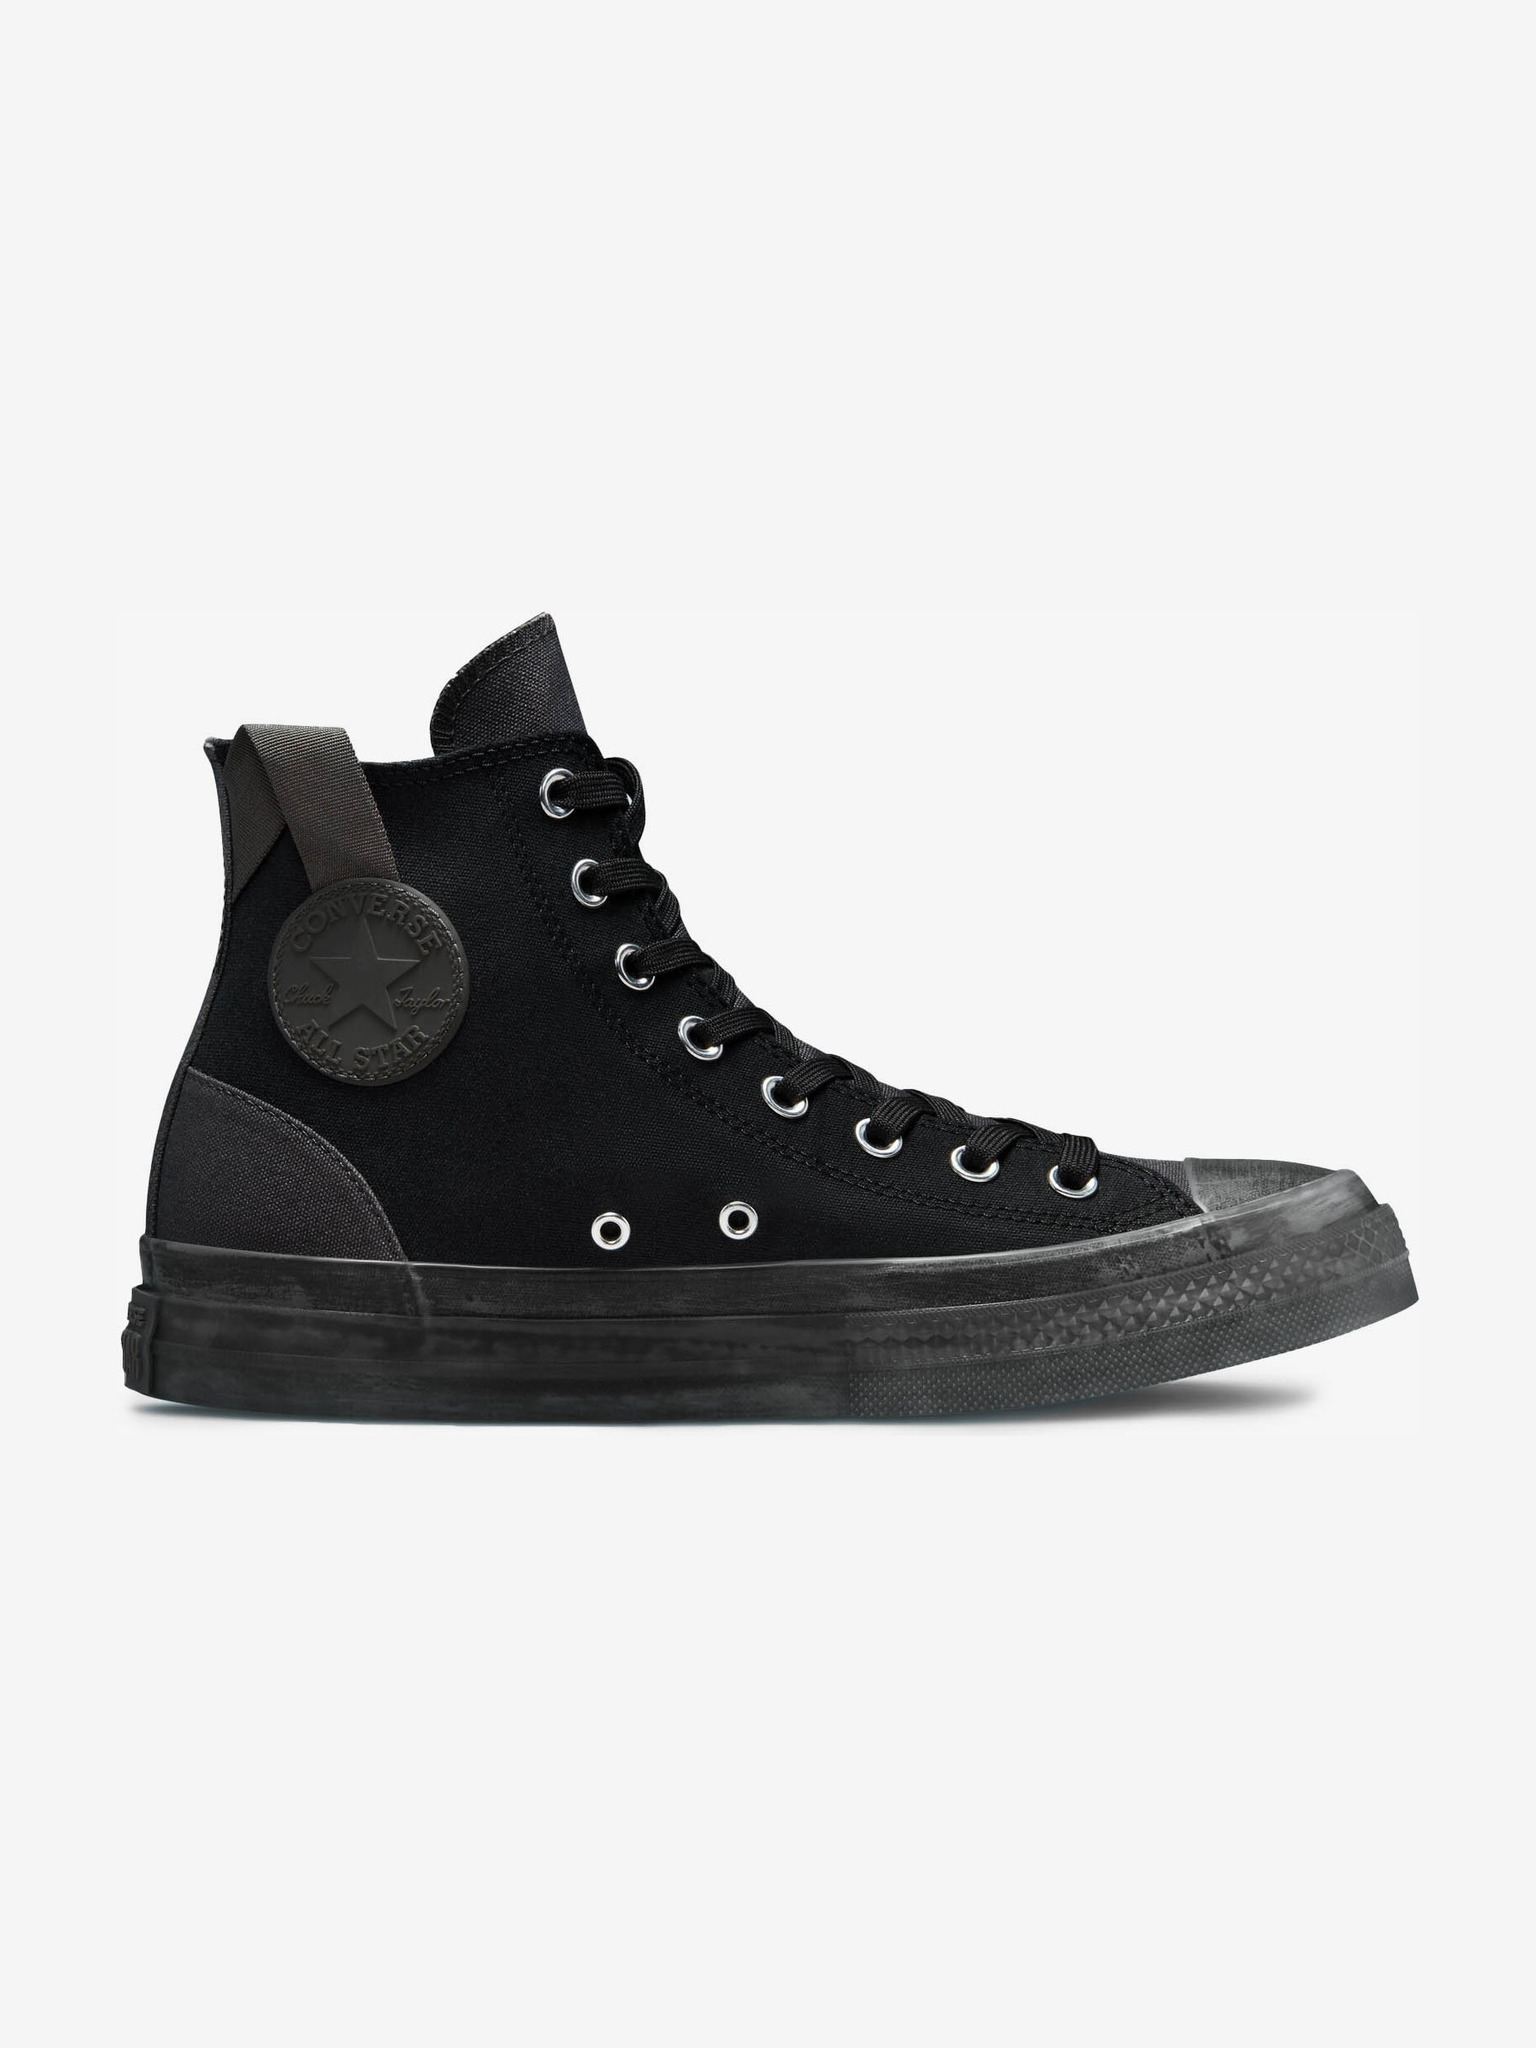 converse Crafted chuck taylor first star